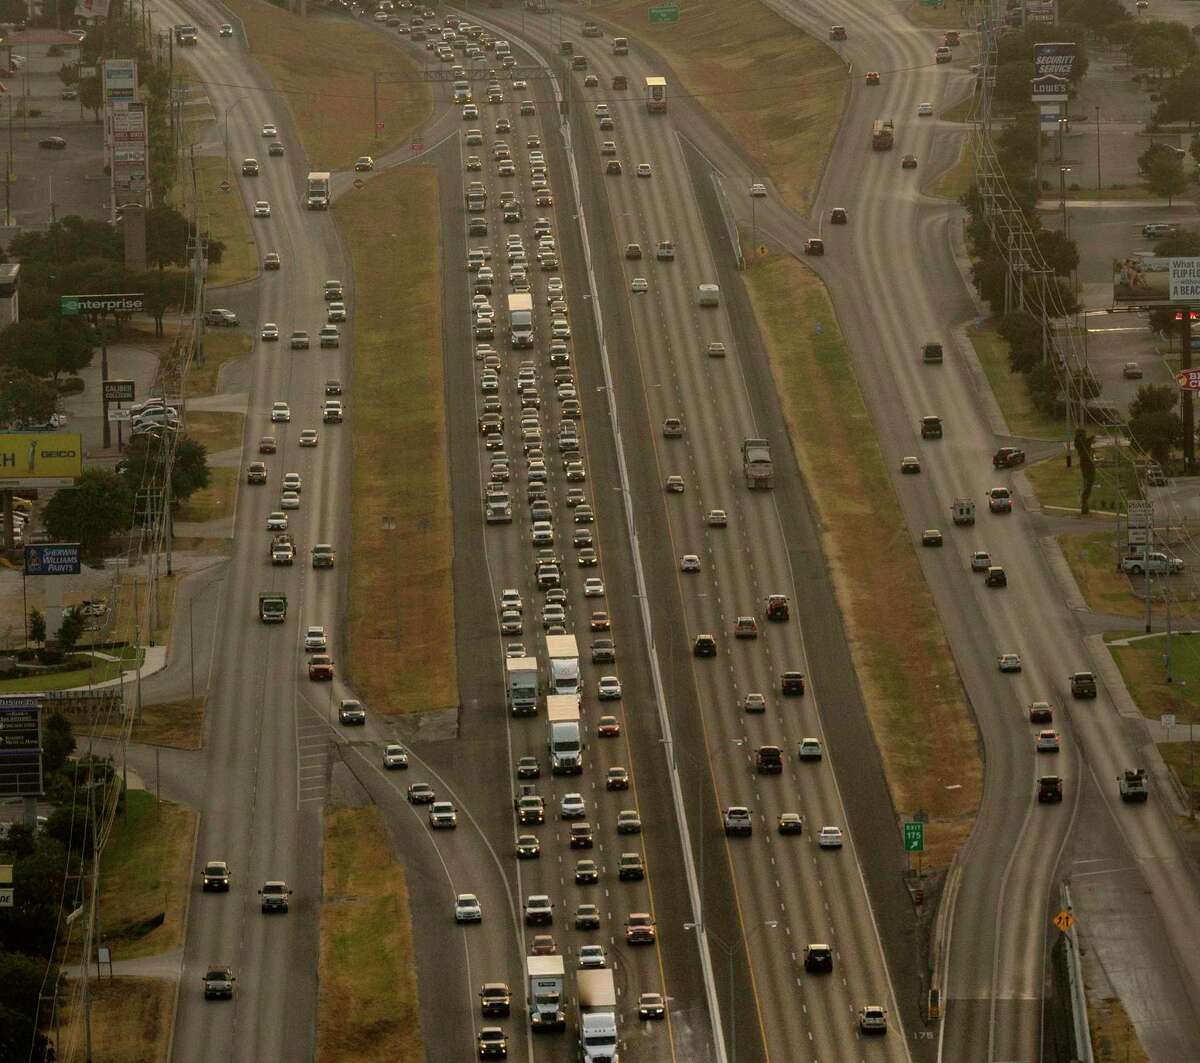 Southbound vehicles fill all the lanes Thursday morning, Aug., 22, 2019 of Interstate 35 on the north side near FM 3009 during morning rush hour. The Texas Department of Transportation has unveiled plans for a 20-mile expansion of I-35 north of Loop 410, including this section, that would make the state?•s busiest stretch of interstate a limited-access, non-tolled, double-decked highway through Selma and Schertz.